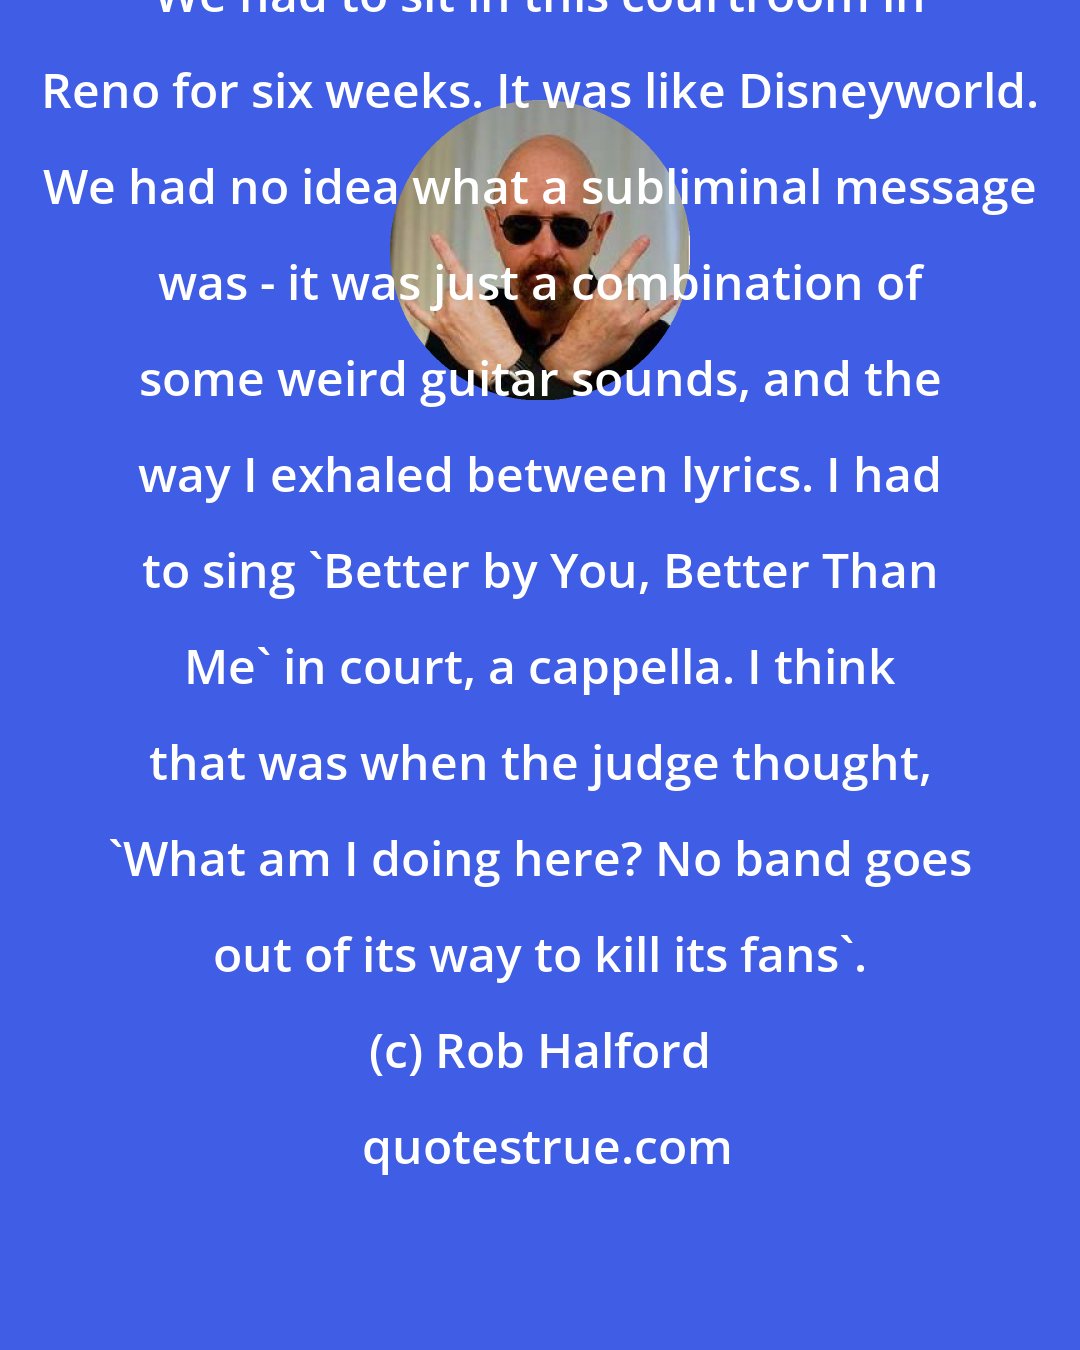 Rob Halford: We had to sit in this courtroom in Reno for six weeks. It was like Disneyworld. We had no idea what a subliminal message was - it was just a combination of some weird guitar sounds, and the way I exhaled between lyrics. I had to sing 'Better by You, Better Than Me' in court, a cappella. I think that was when the judge thought, 'What am I doing here? No band goes out of its way to kill its fans'.